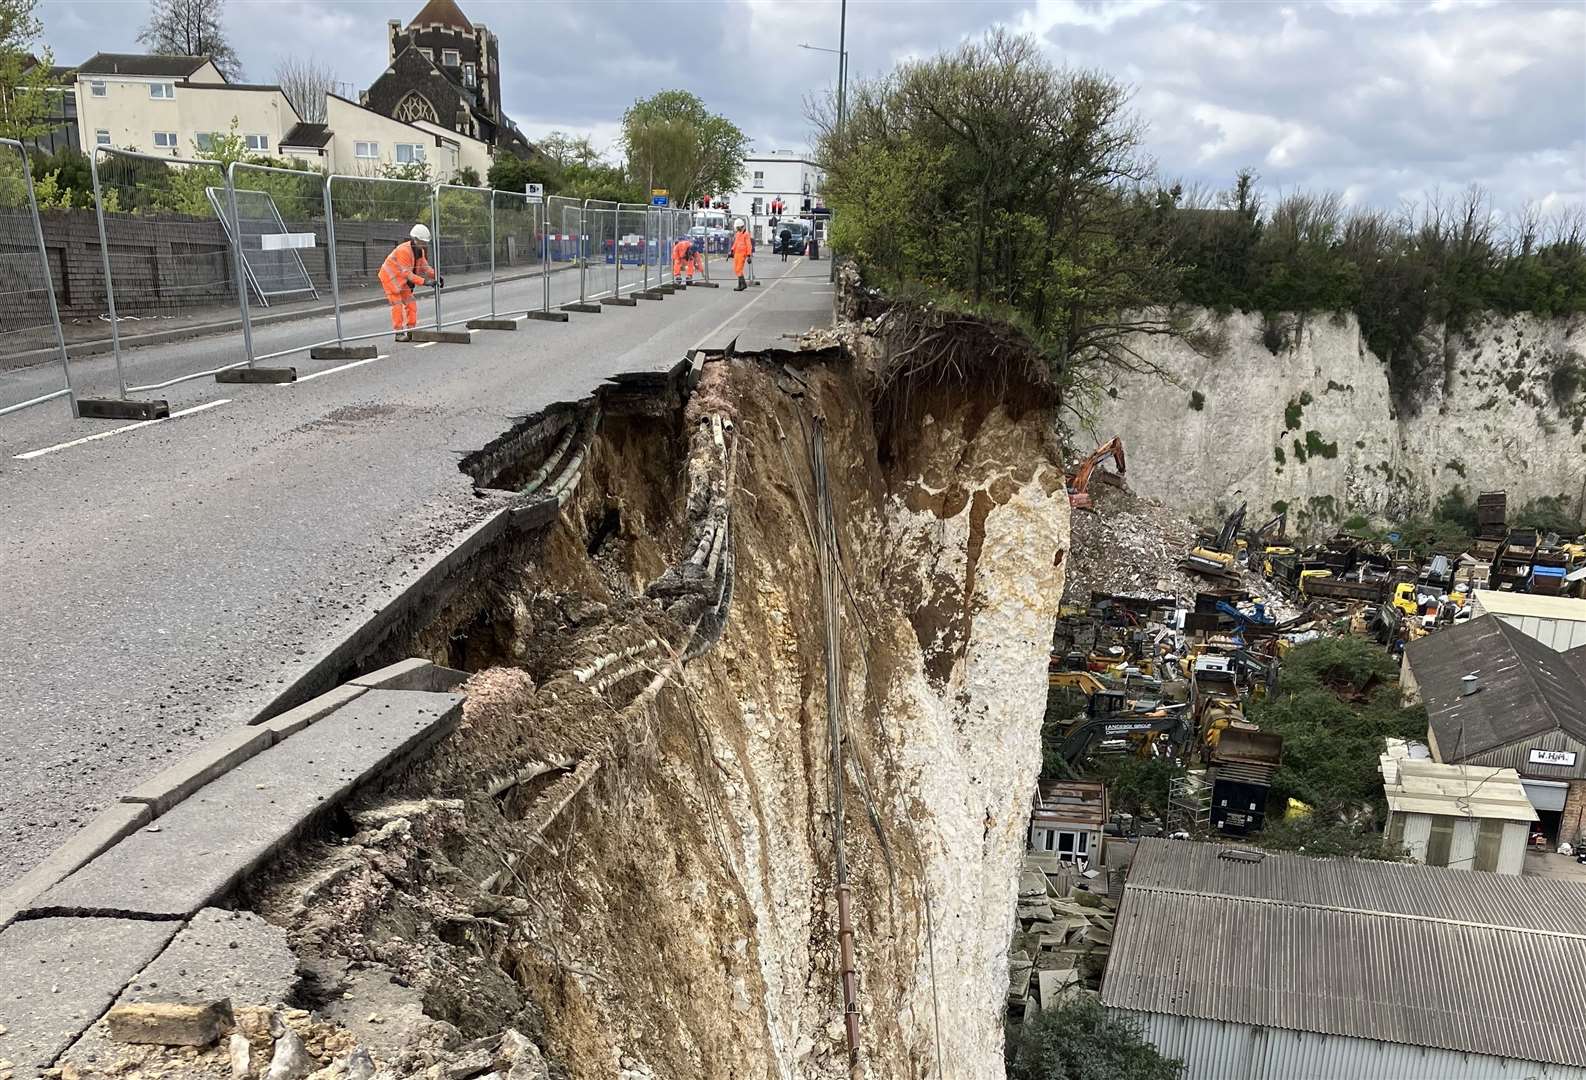 Dartford Borough Council has declared a "major incident" after the cliff collapsed last Monday